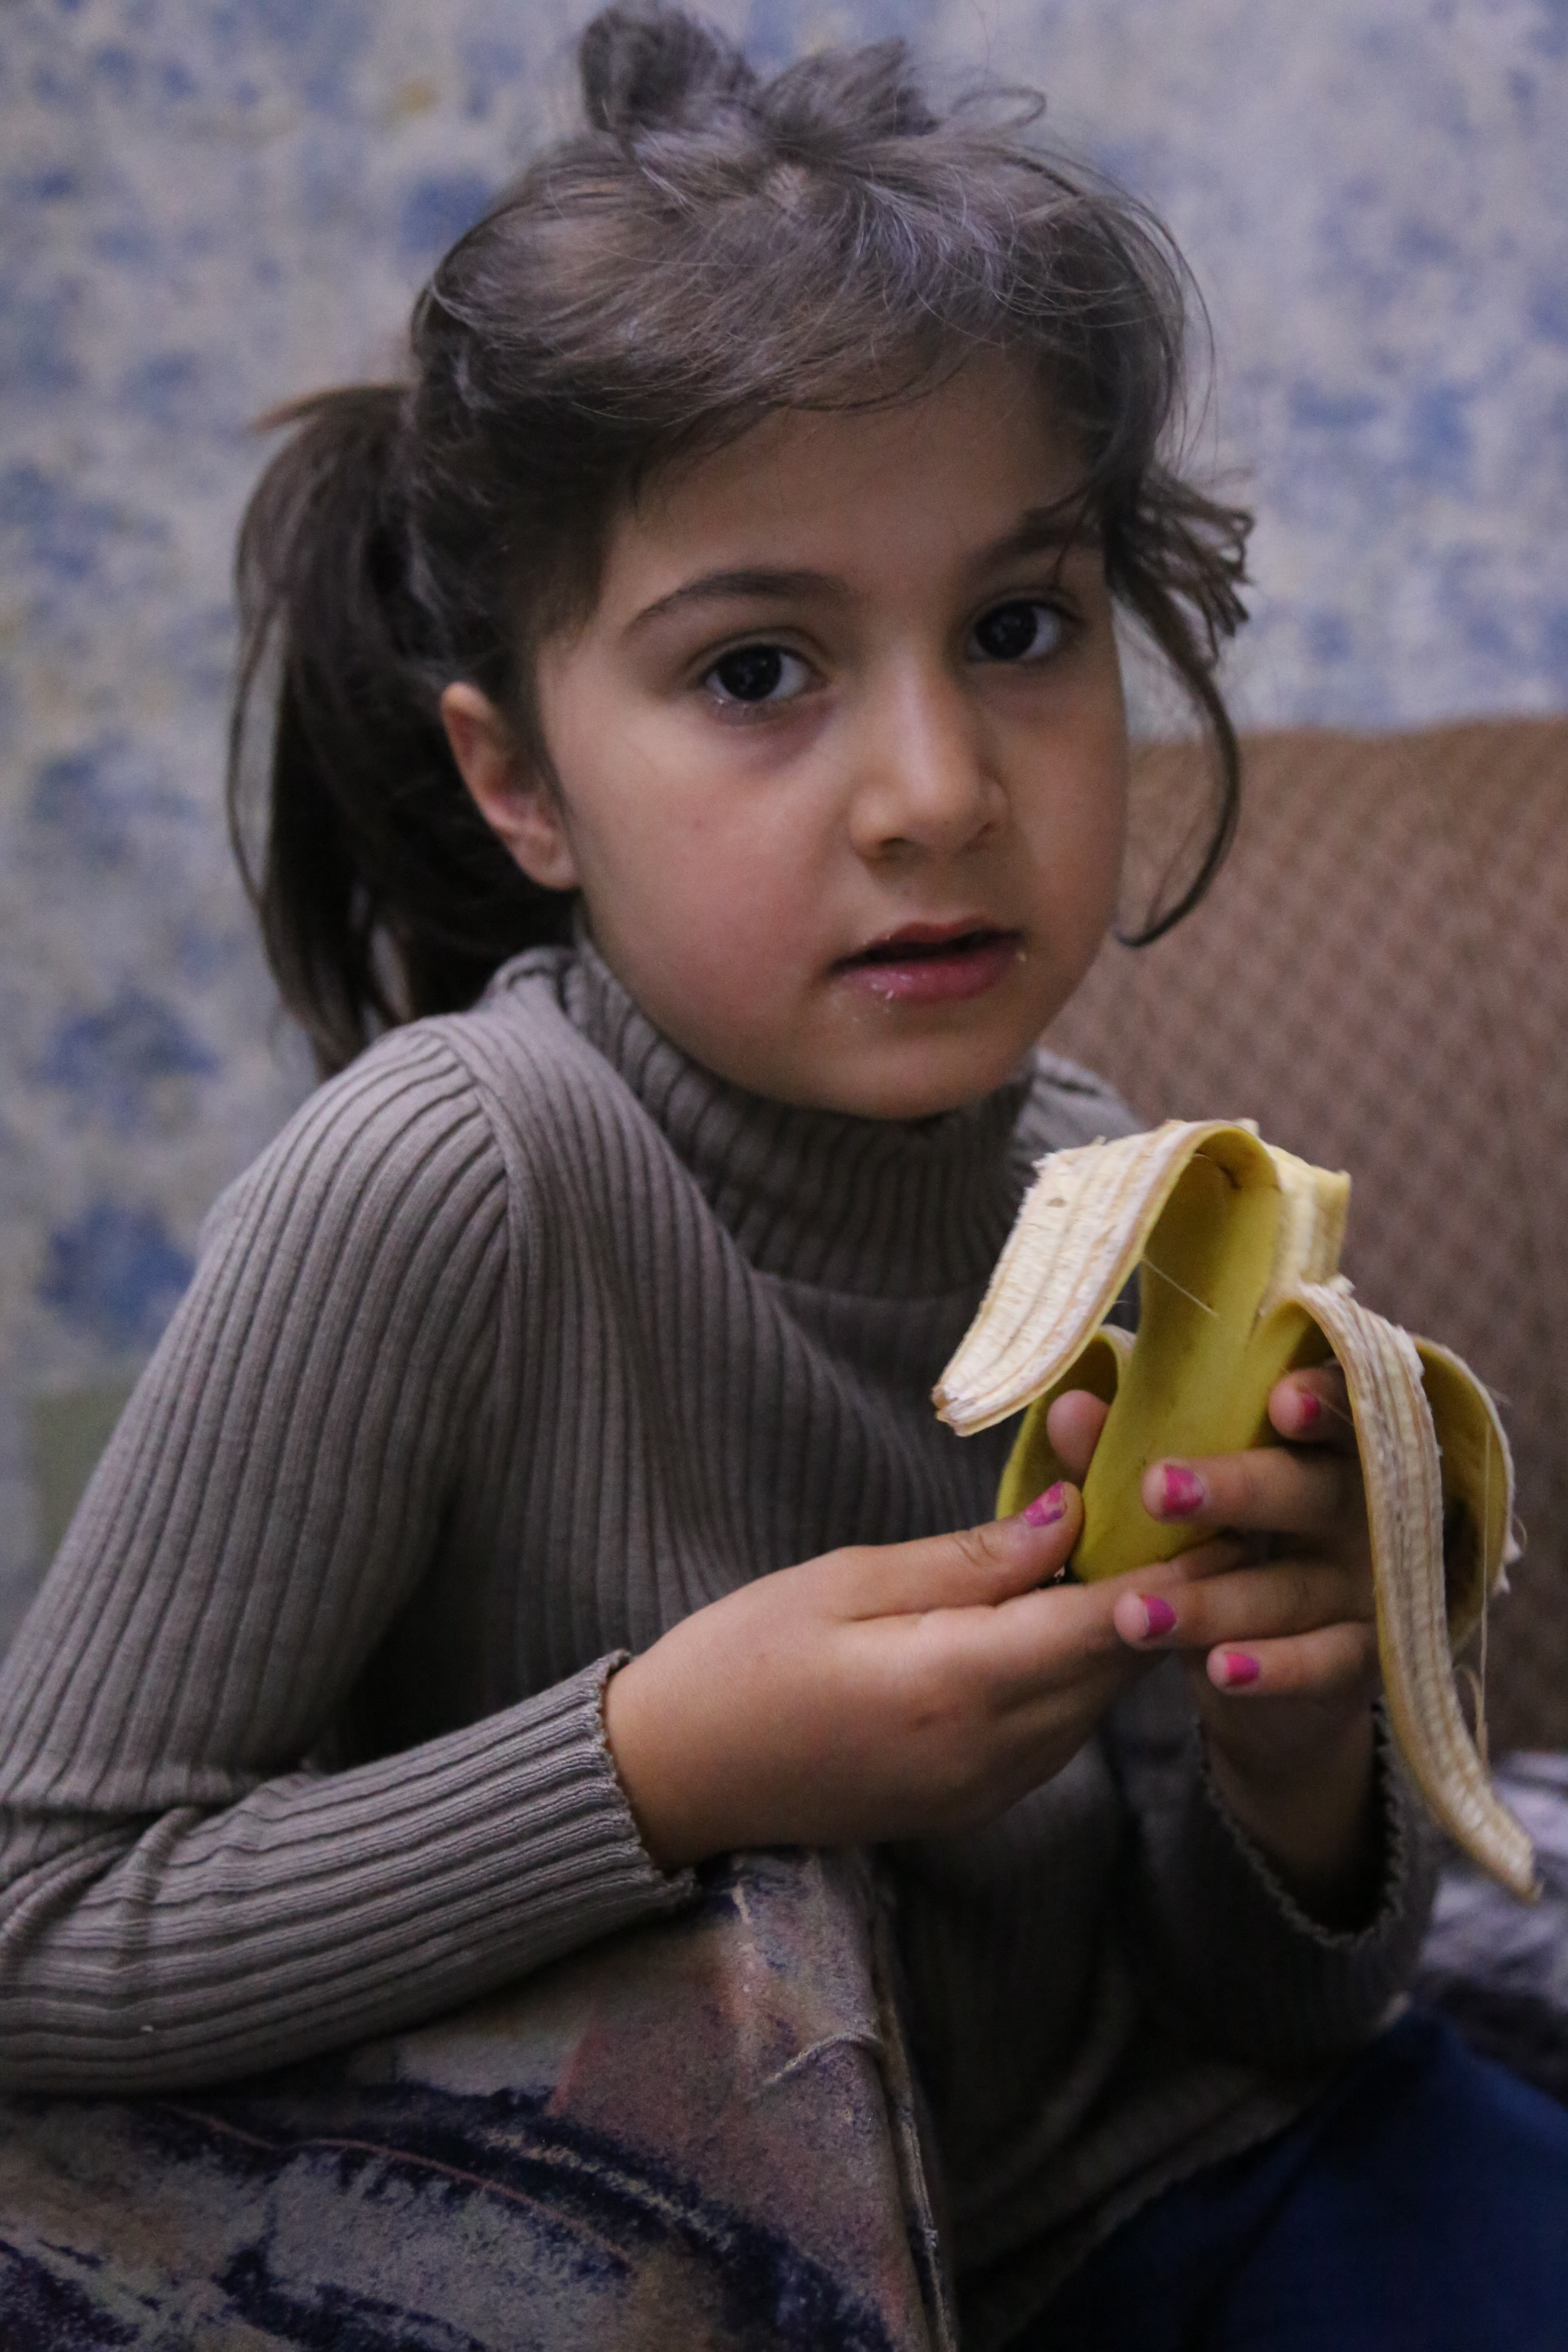 Rama, a 7-year-old Syrian refugee girl who now lives in Mount Lebanon. Through WFP’s e-cards, Rama can eat fresh vegetables and fruits.